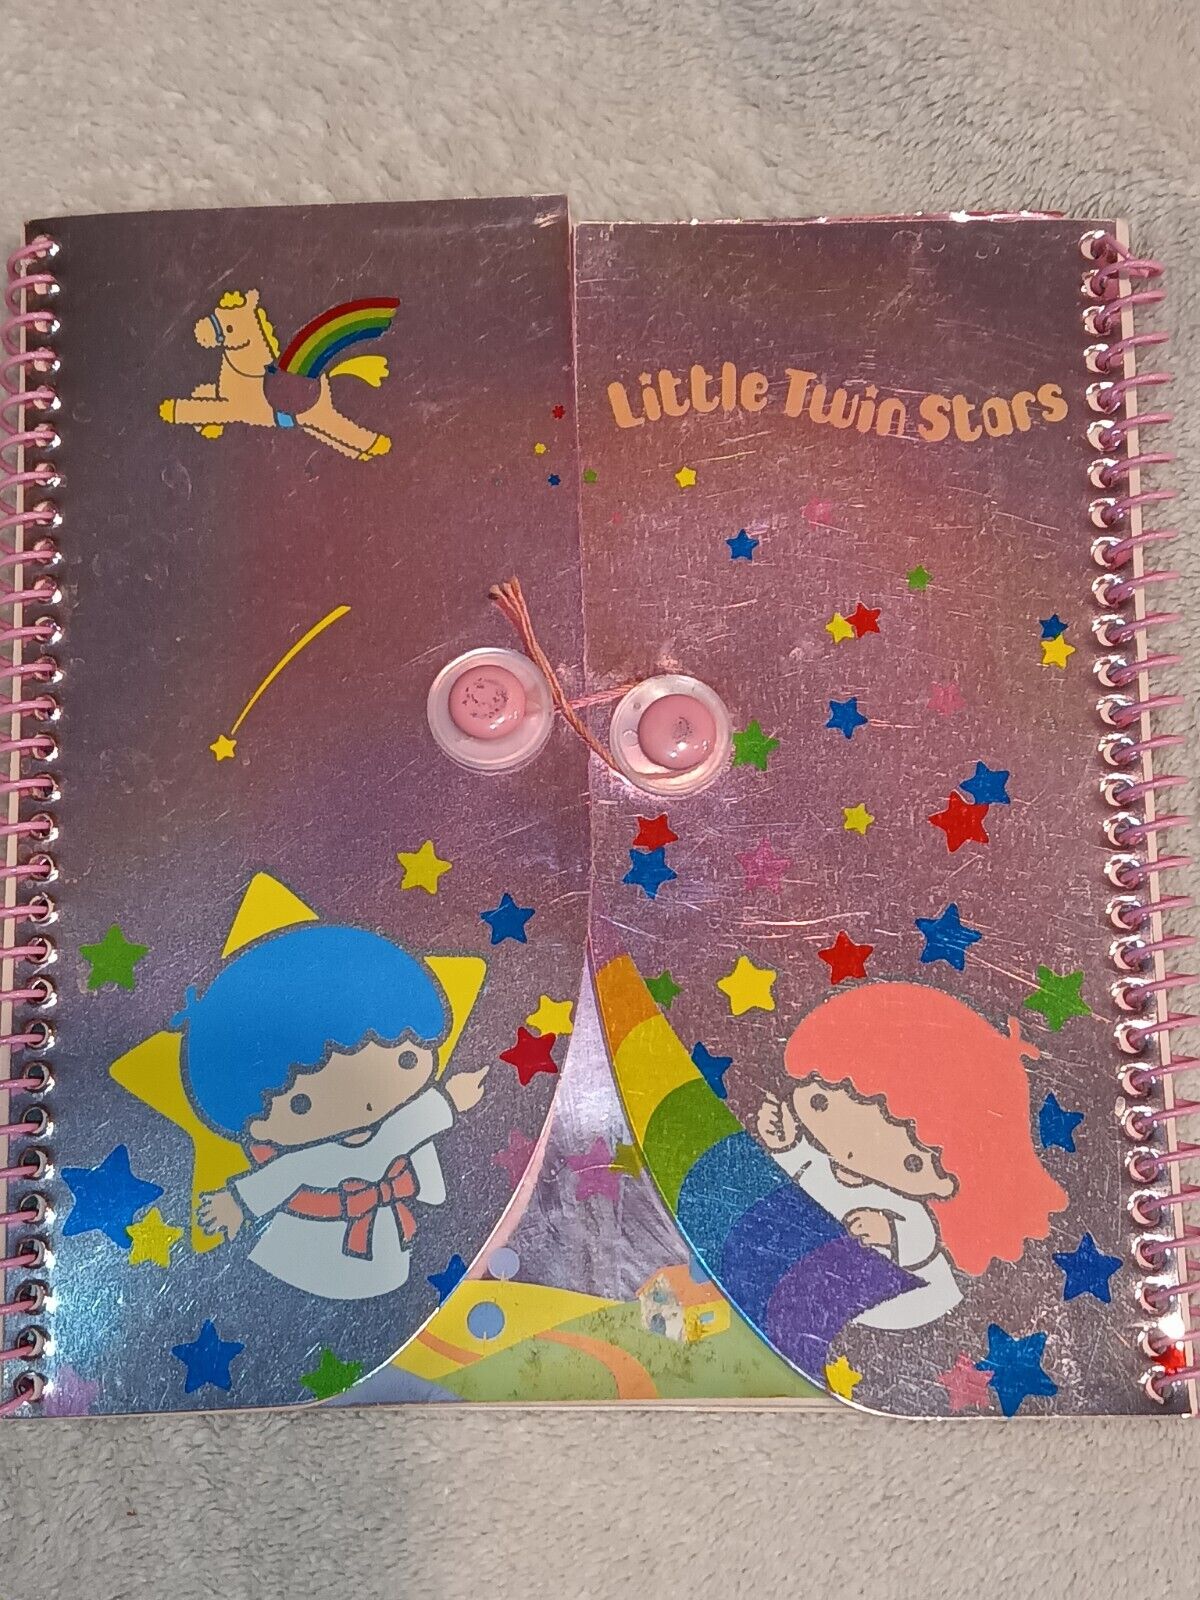 New Vintage 1976 1984 Sanrio Little Twin Stars  Notebook Lined